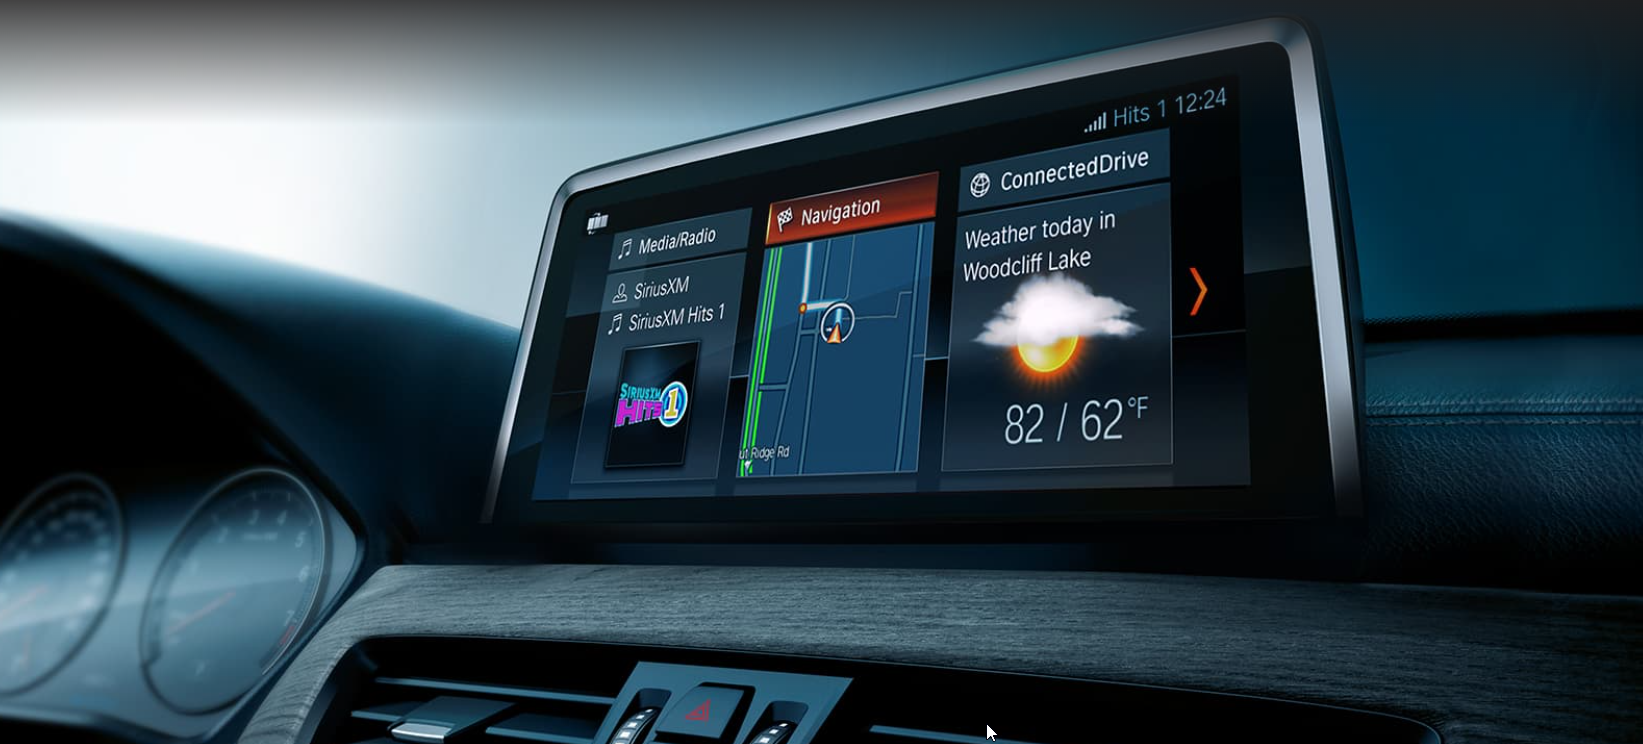 BMW X1 infotainment in view showing all the apps